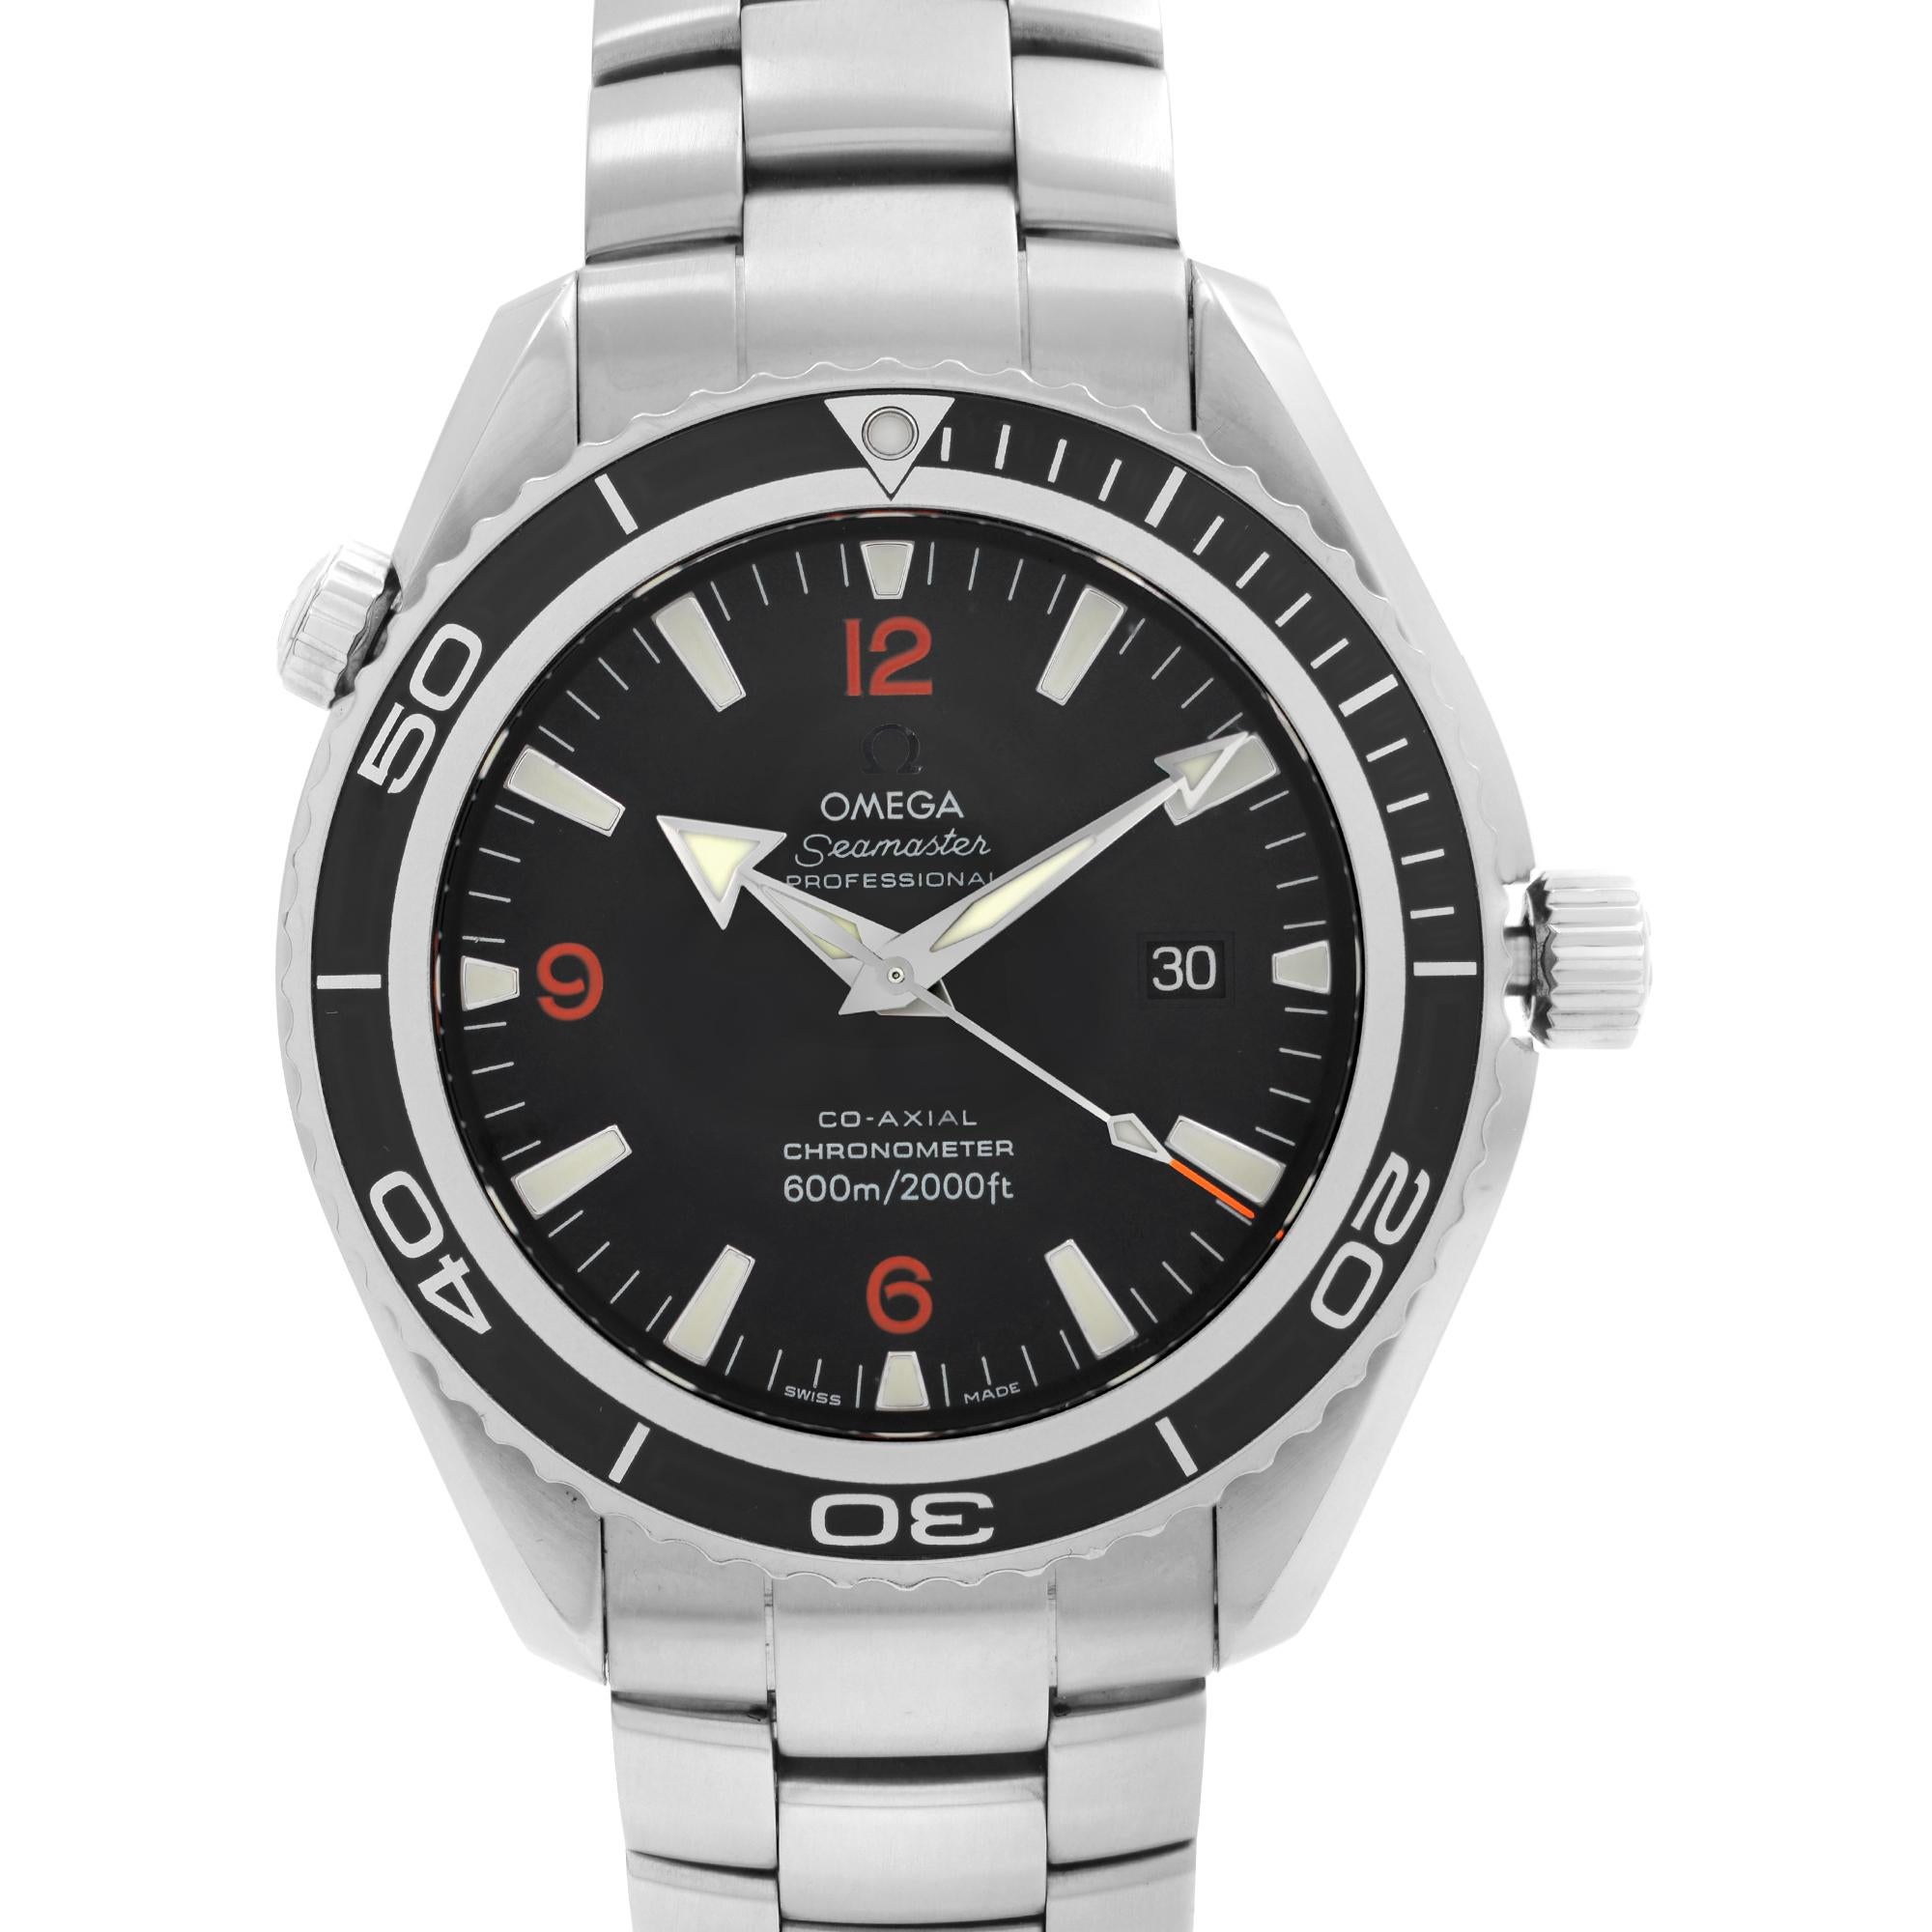 Pre Owned Omega Seamaster Planet Ocean 600M 45mm Steel Black Dial Men's Automatic Watch 2200.51.00. Bezel have minor scratches and dings. This Beautiful Timepiece is Powered by Mechanical (Automatic) Movement And Features: Round Stainless Steel Case